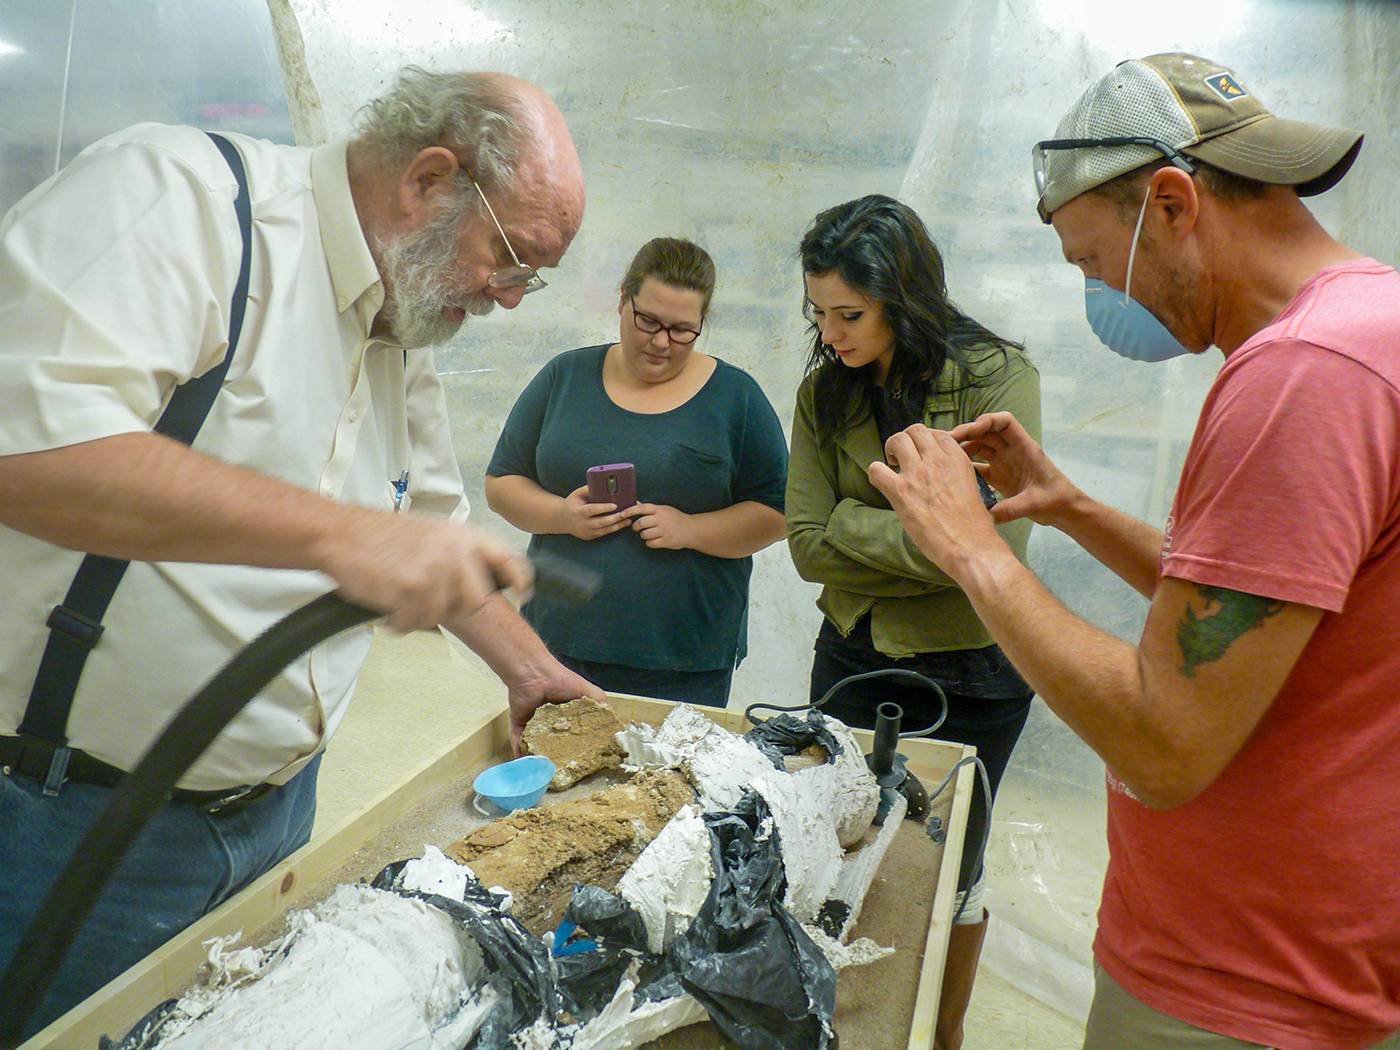 WSU students and professor work to excavate a mammoth tusk discovered in Cunningham, Kansas